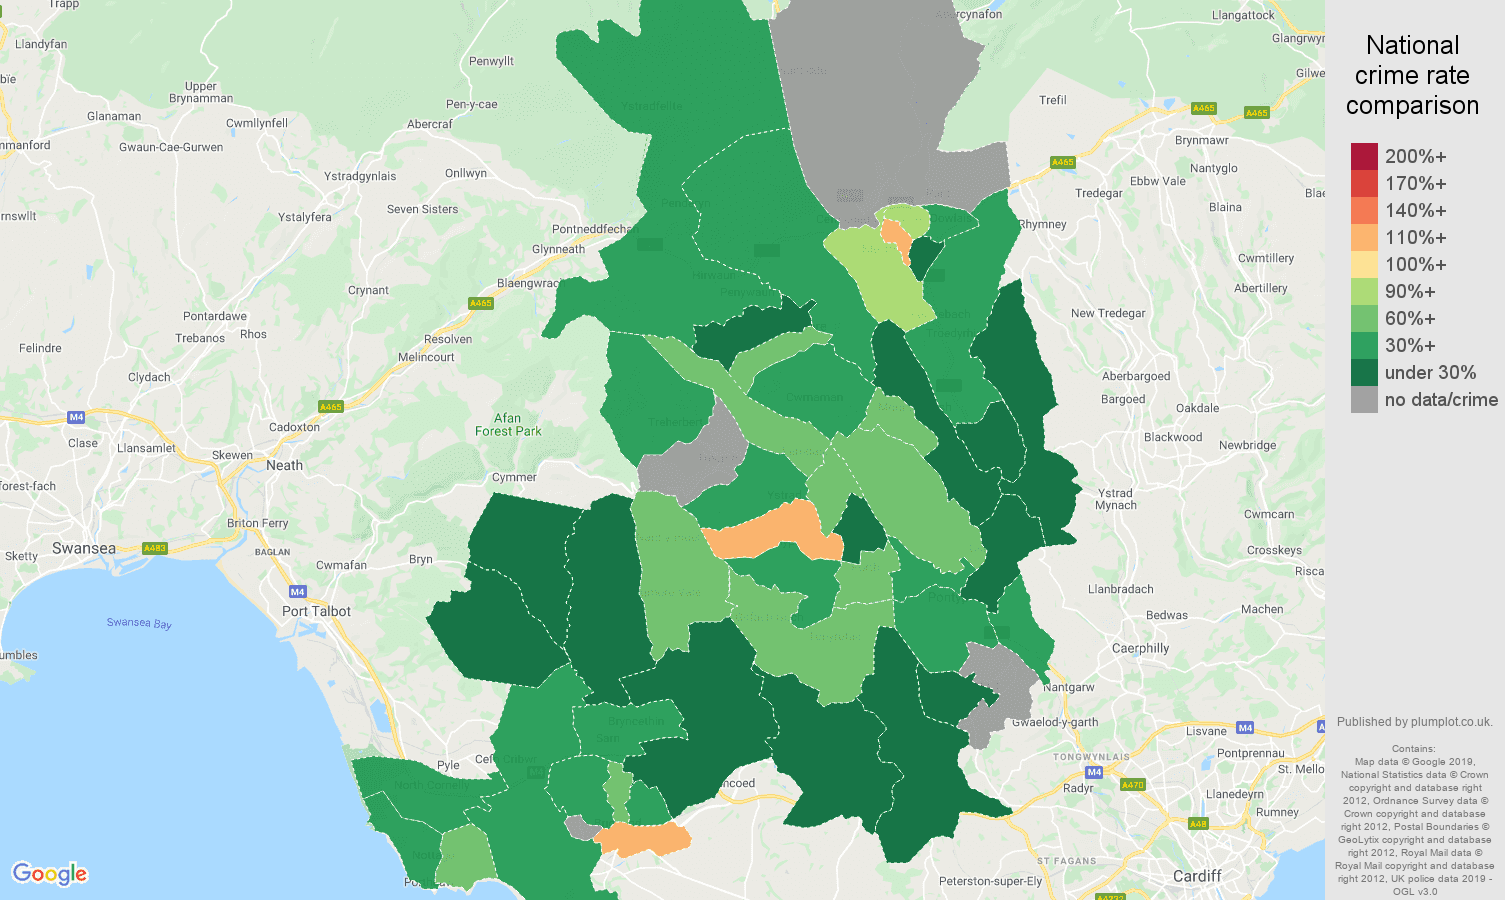 Mid Glamorgan possession of weapons crime rate comparison map